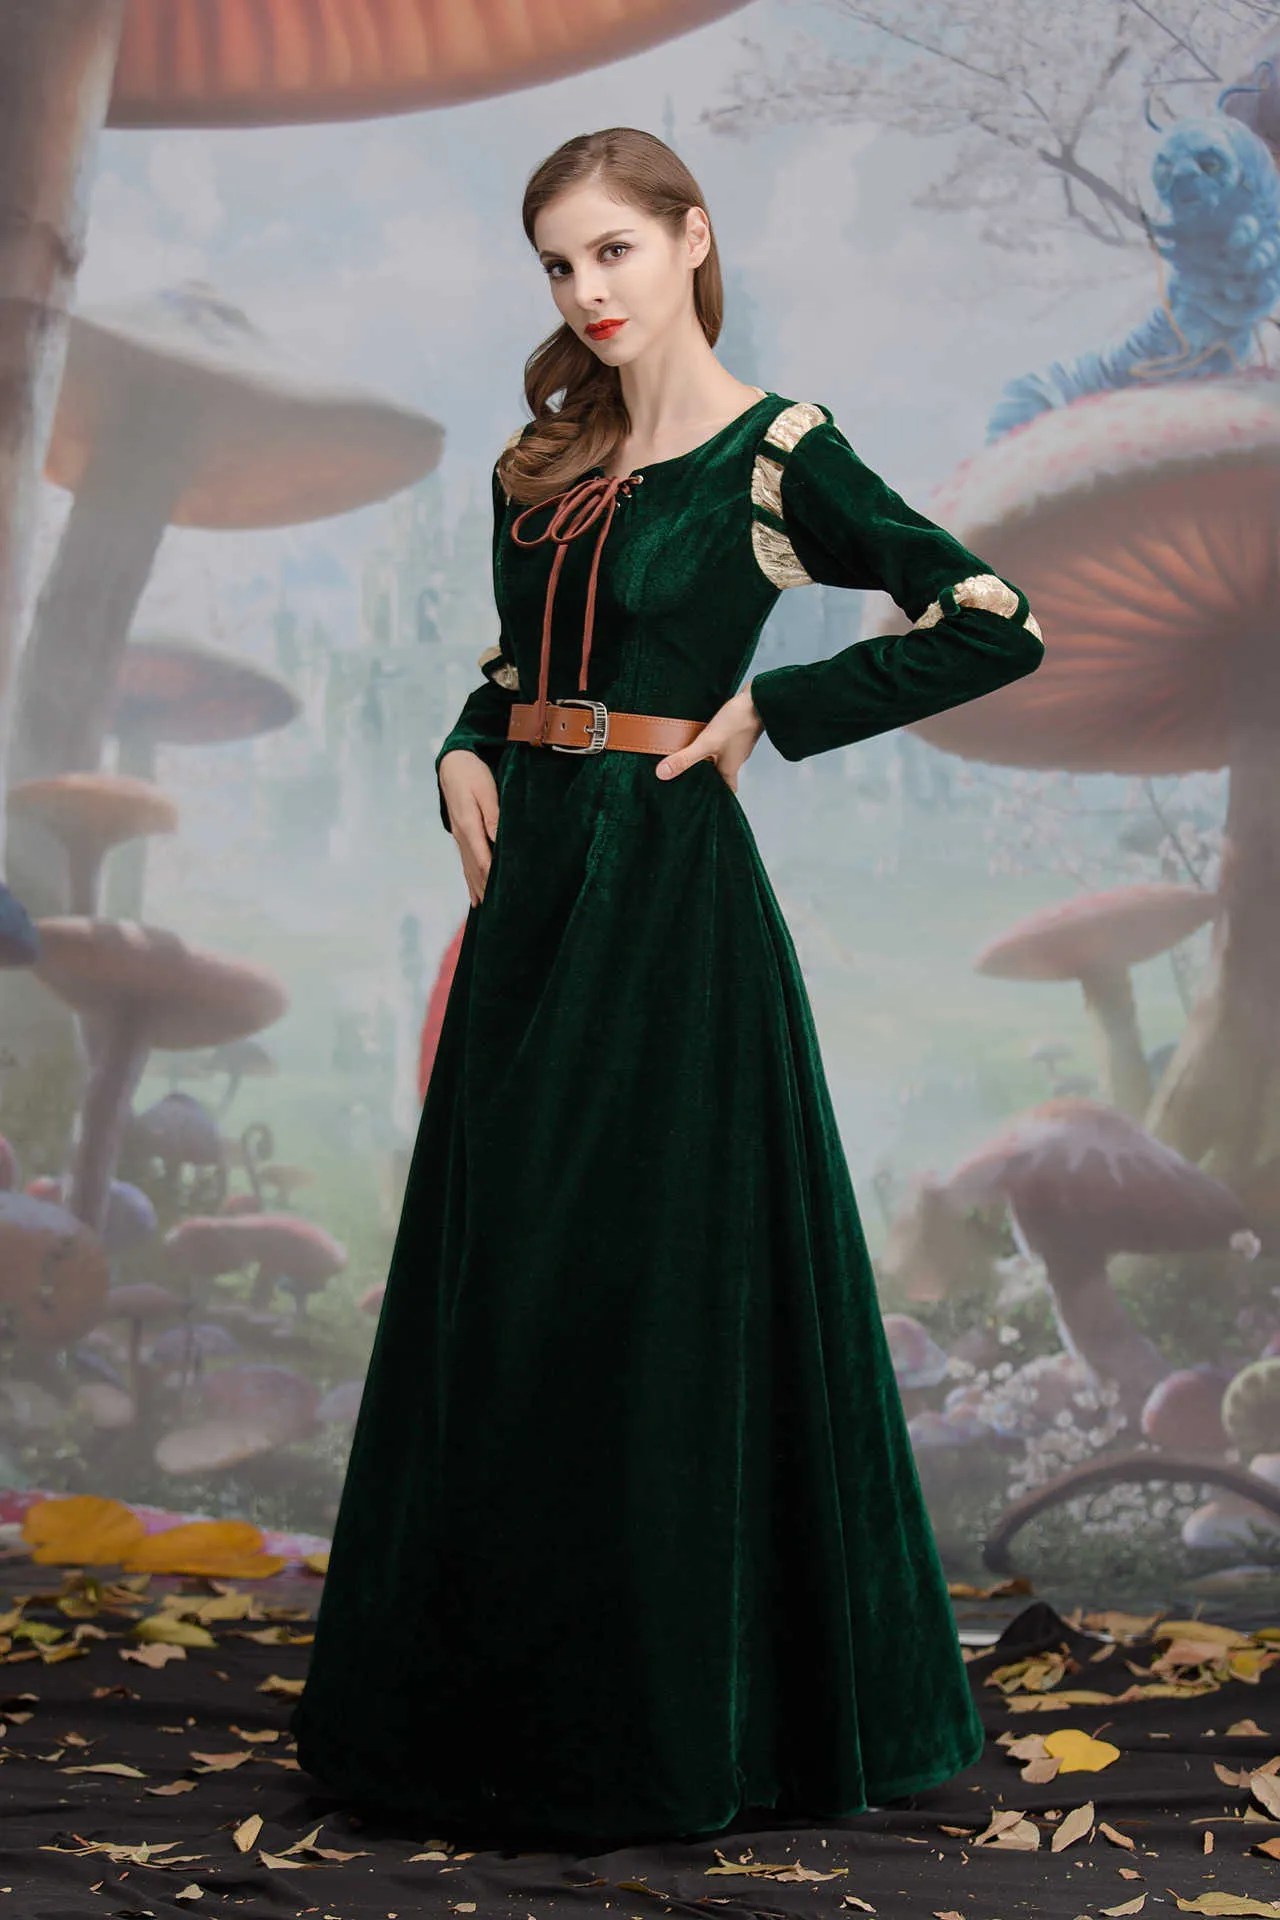 Special Occasions Merida Princess Come for Adult S M L XL Fancy Brave Merida Dress Girls Cosplay Carnival Apparel Female Halloween Frock W0221